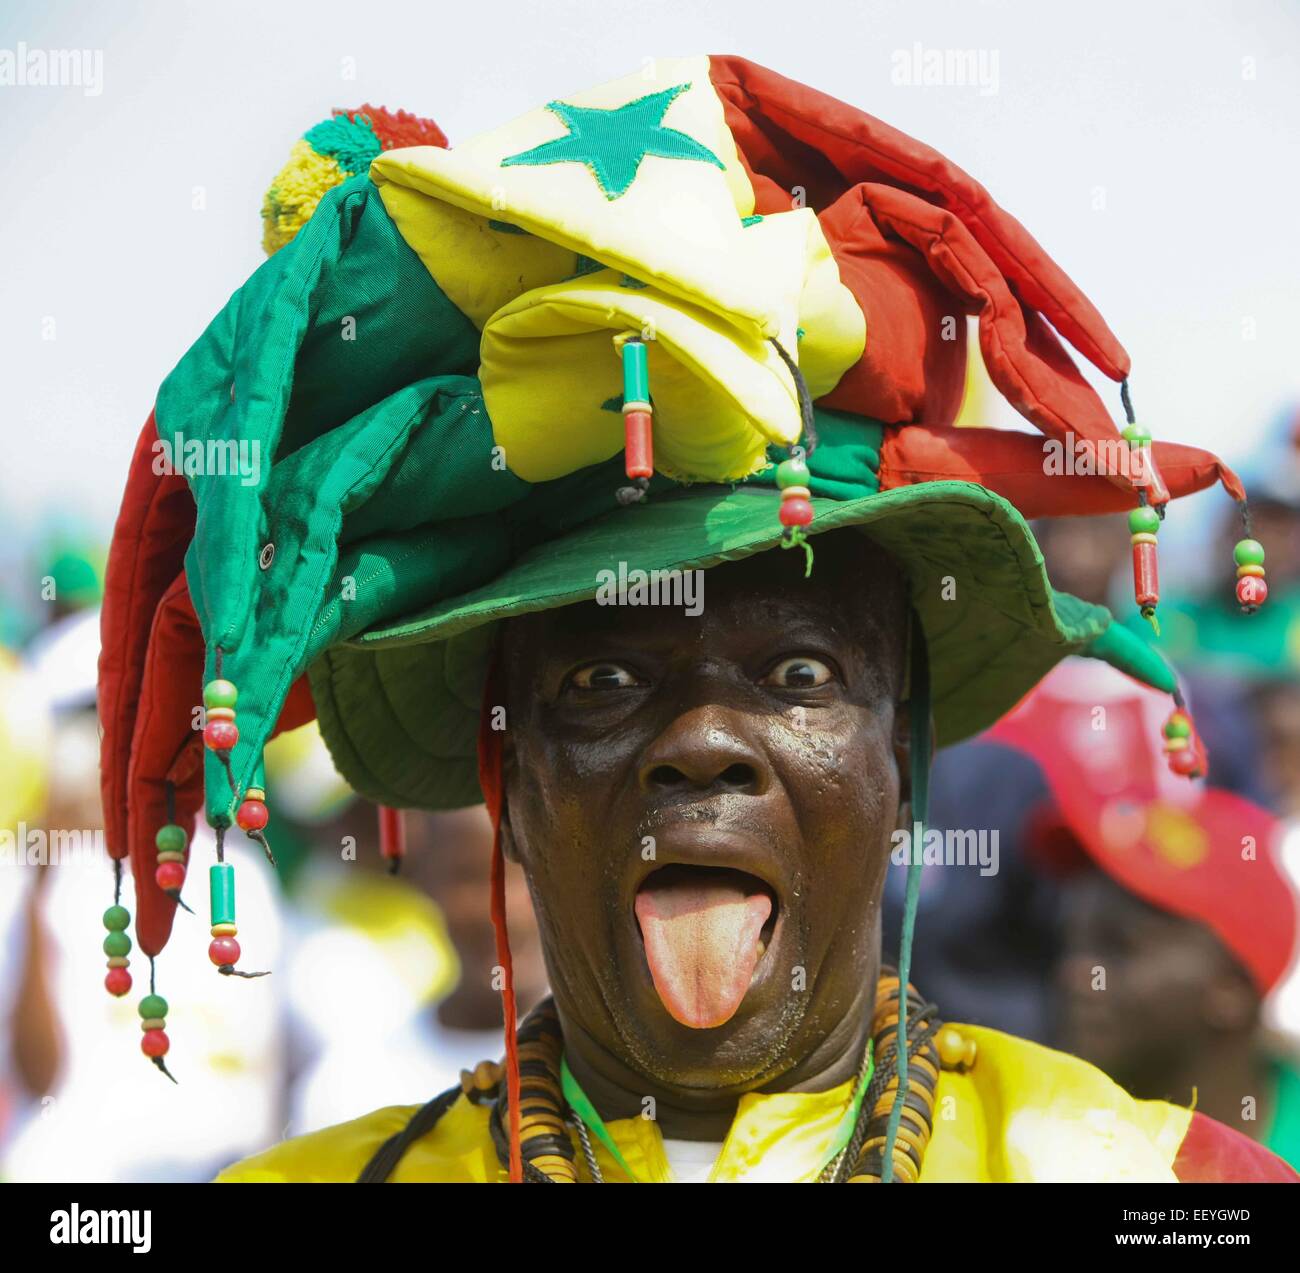 Mongomo, Equatorial Guinea. 23rd Jan, 2015. Senegalese football fans pose for a photo before the group match of Africa Cup of Nations between Senegal and South Africa in Mongomo, Equatorial Guinea, Jan. 23, 2015. The match ended with an 1-1 draw. Credit:  Li Jing/Xinhua/Alamy Live News Stock Photo